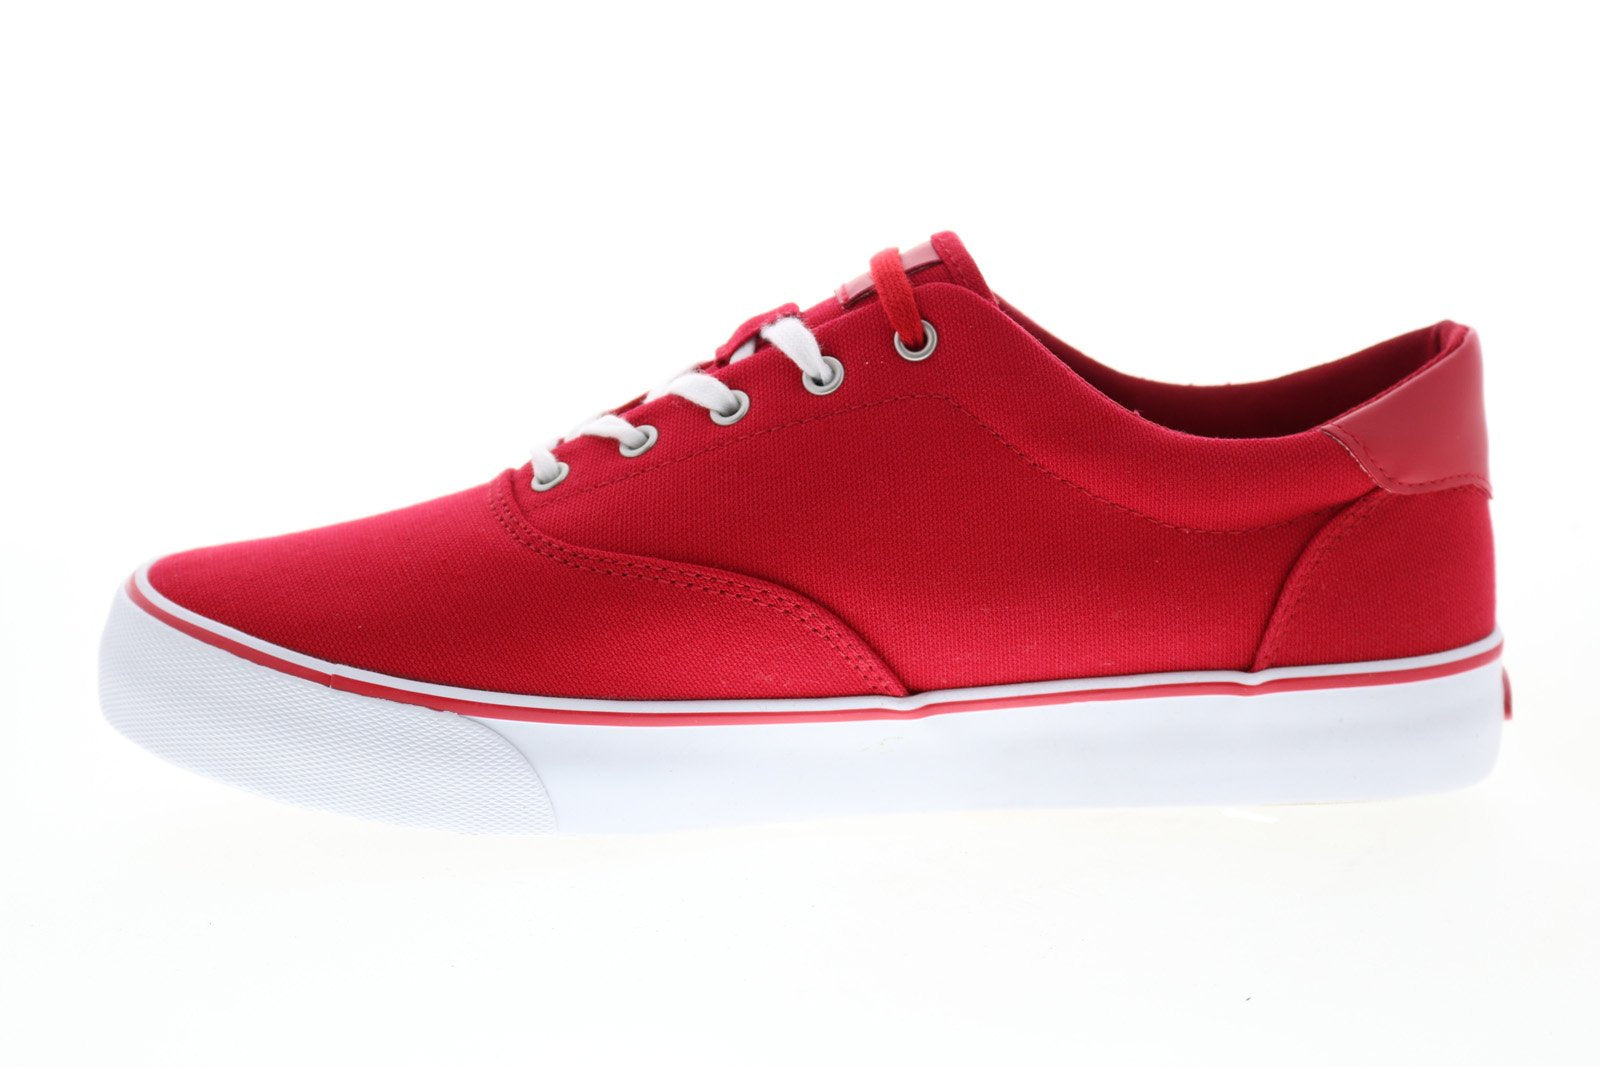 Lugz Flip MFLIPC-6330 Mens Red Canvas Lace Up Lifestyle Sneakers Shoes ...